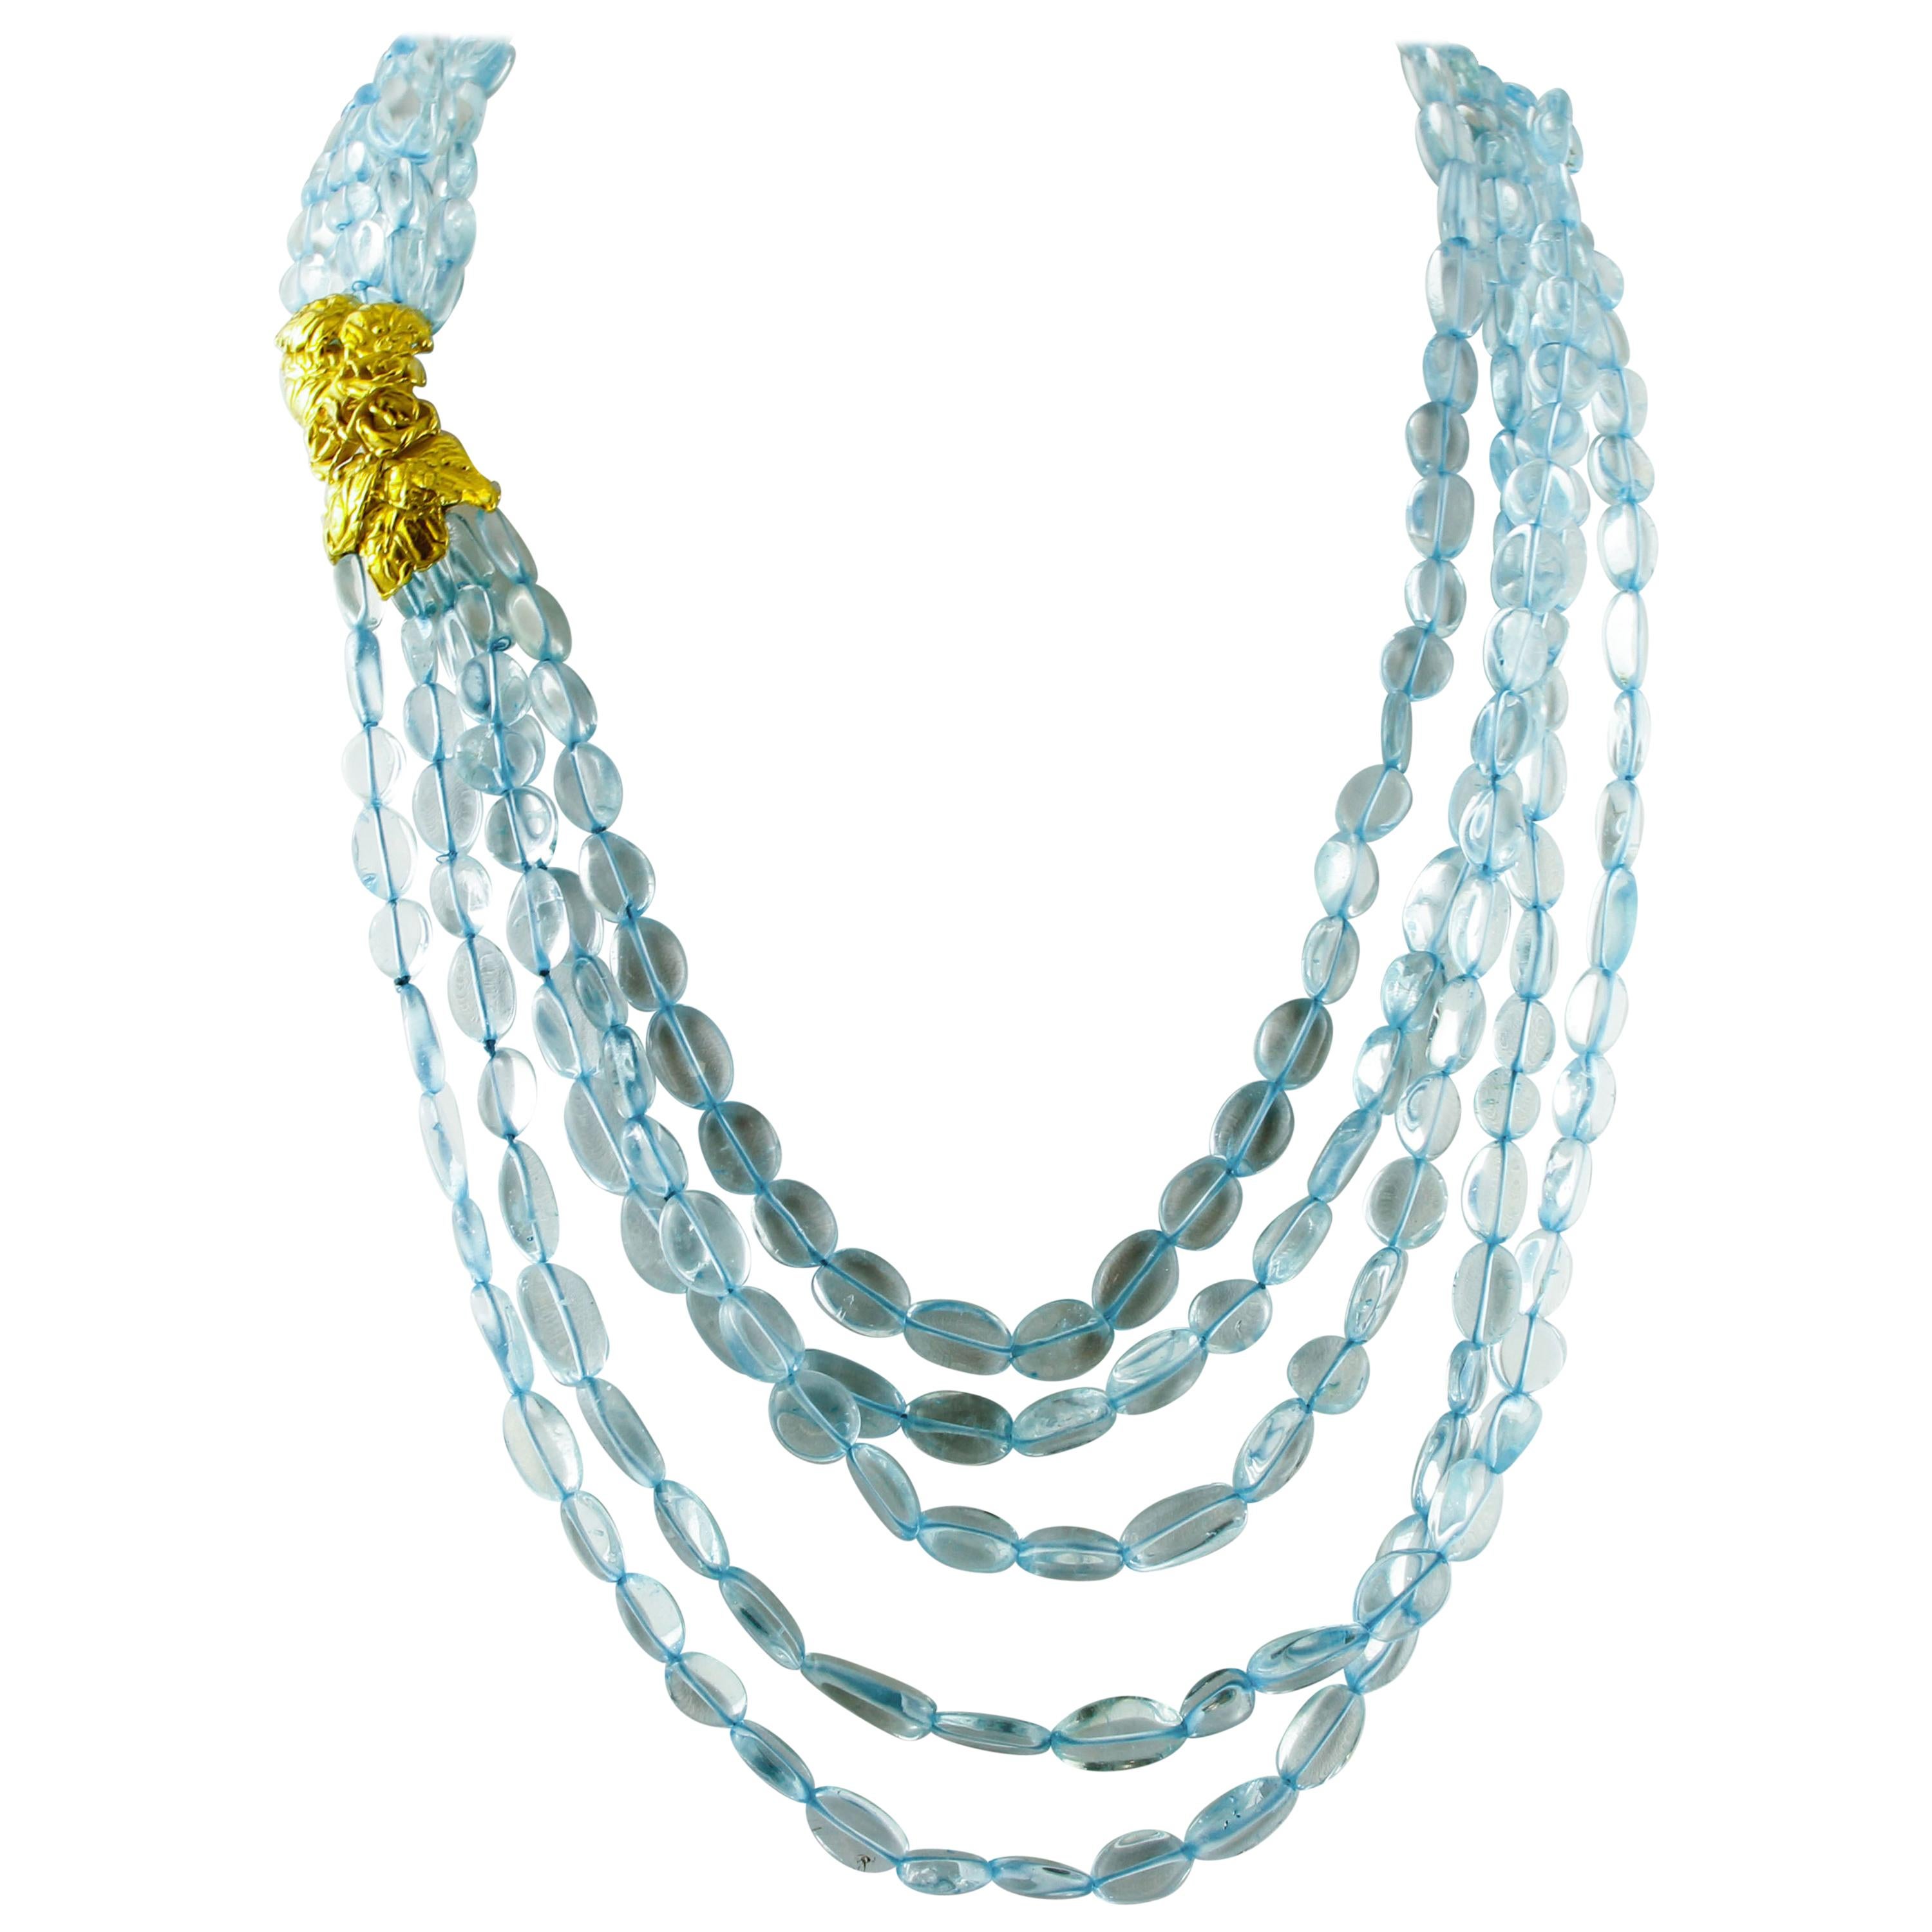 257 g Rock Crystal Multi-Strands Necklace with 18 Karat Yellow Gold Closure For Sale